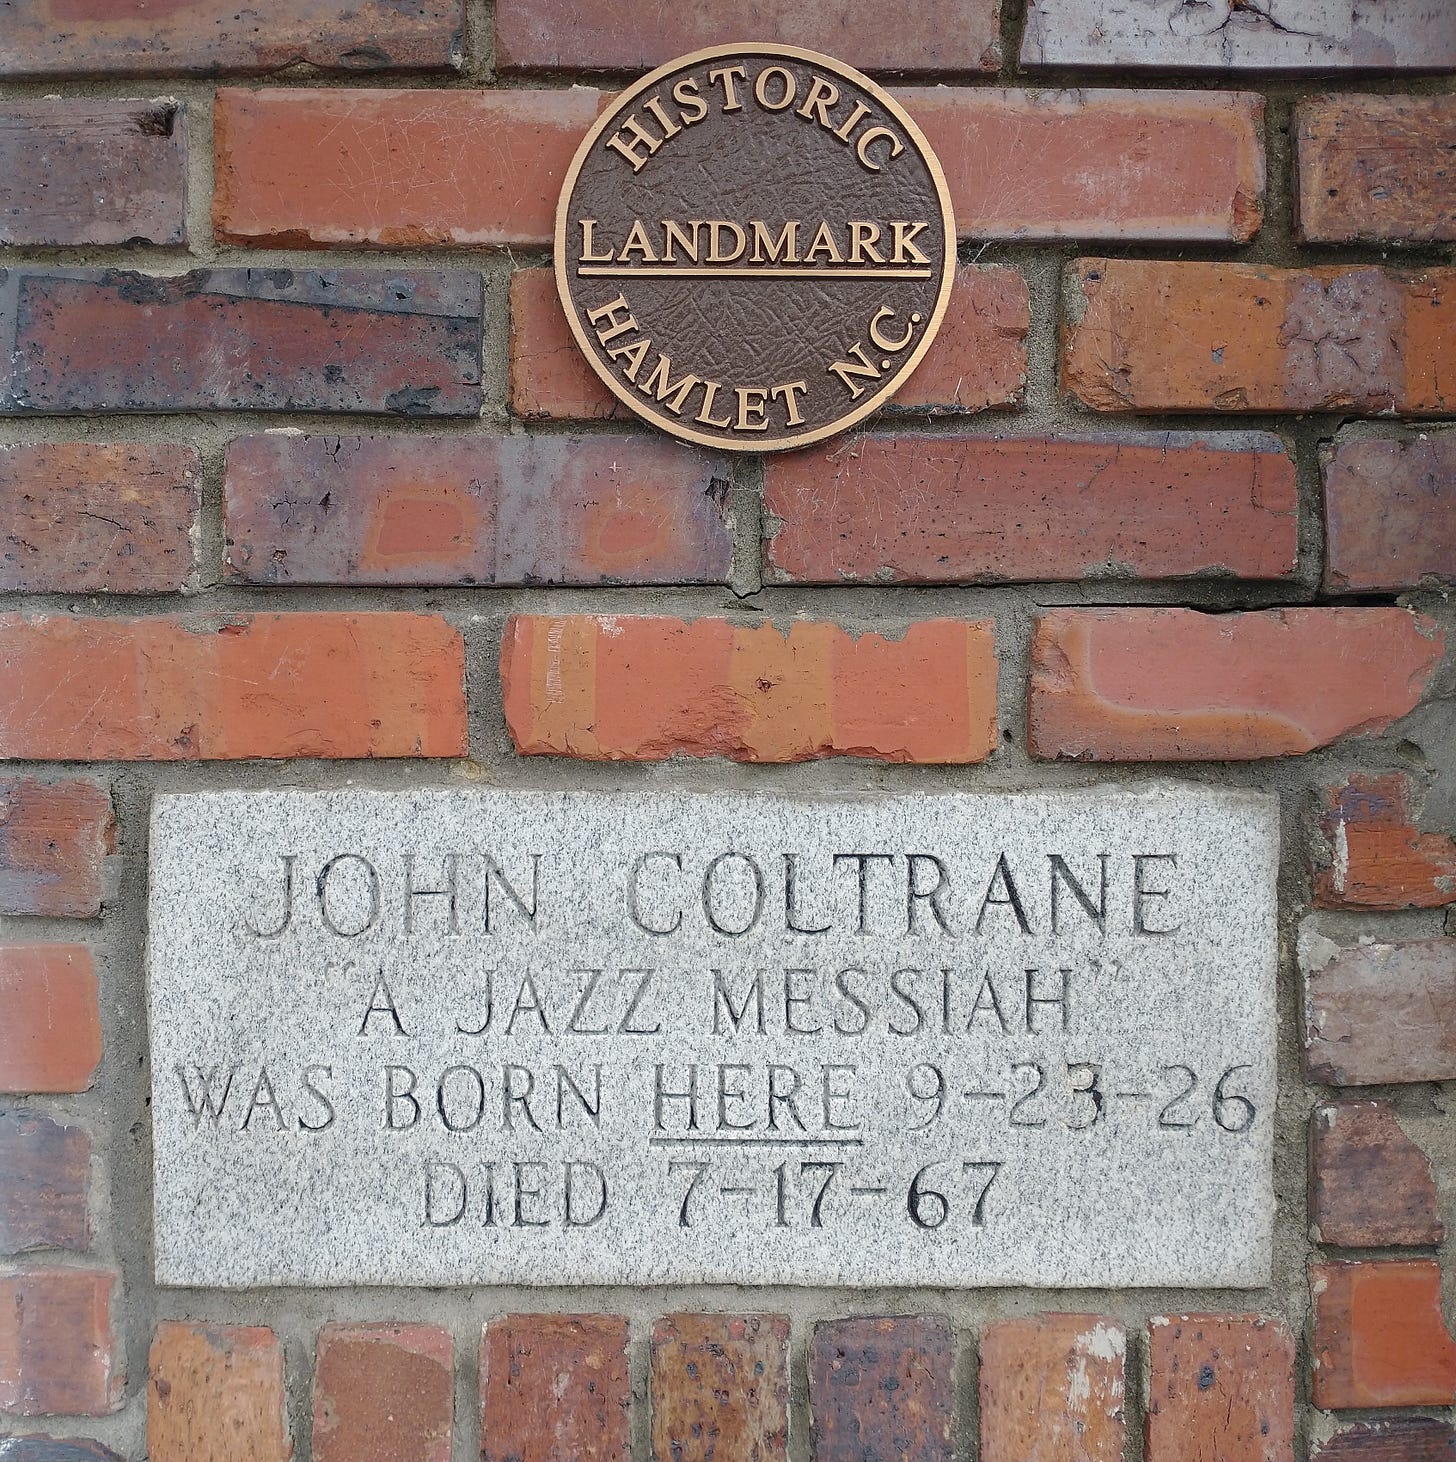 Historical marker on brick building reading "John Coltrane, A Jazz Messiah, was born here 9-23-26 died 7-17-67